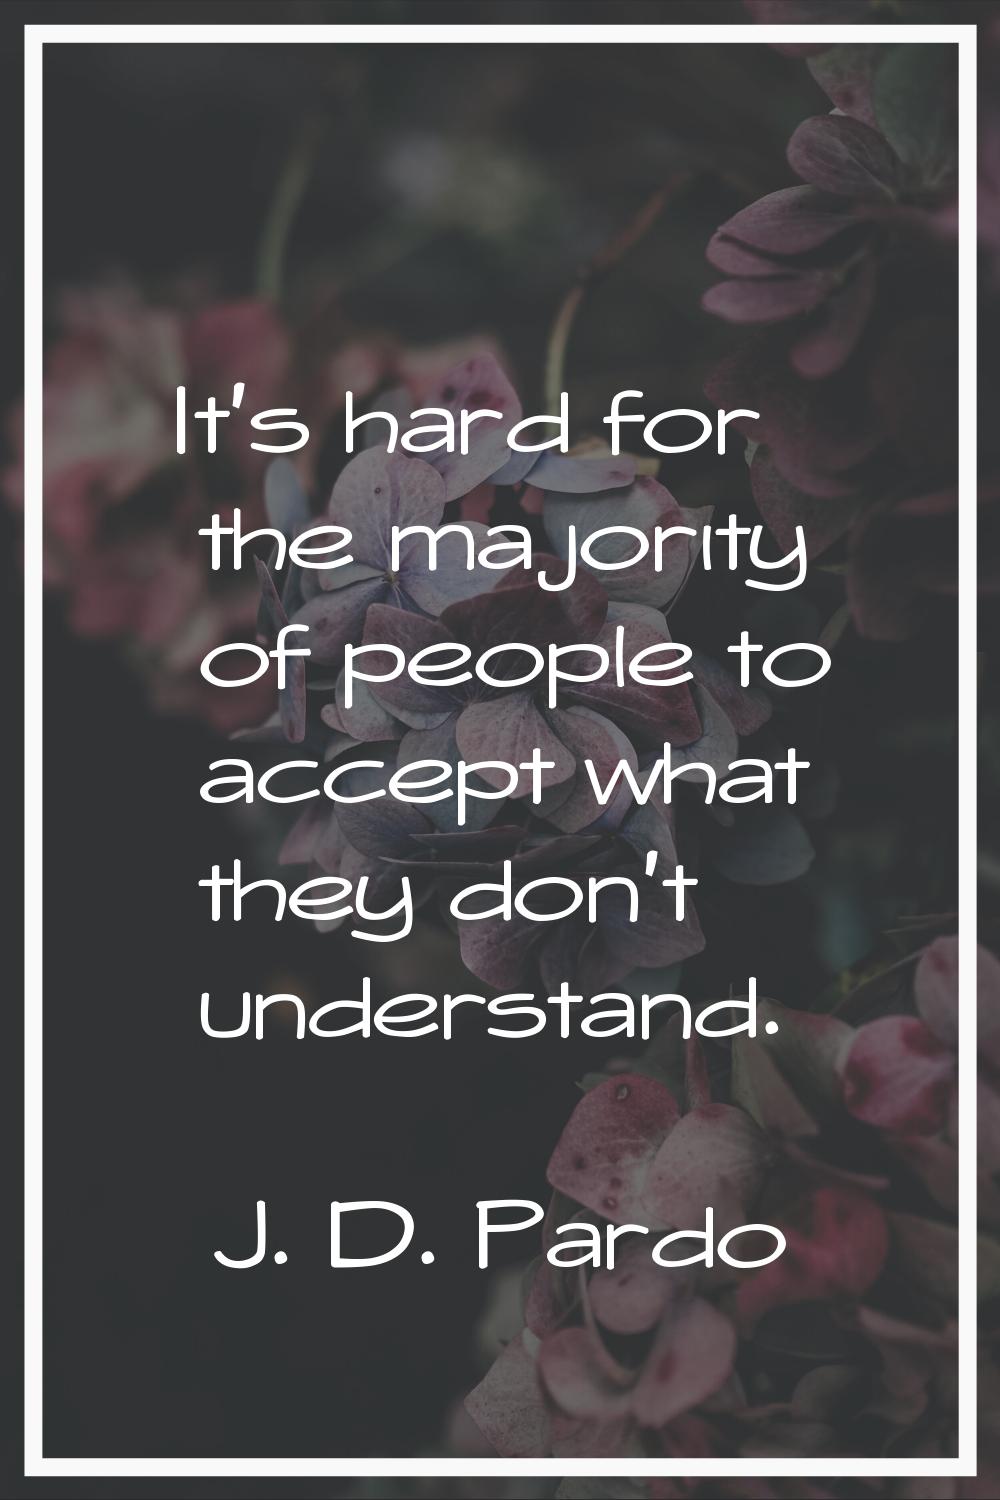 It's hard for the majority of people to accept what they don't understand.